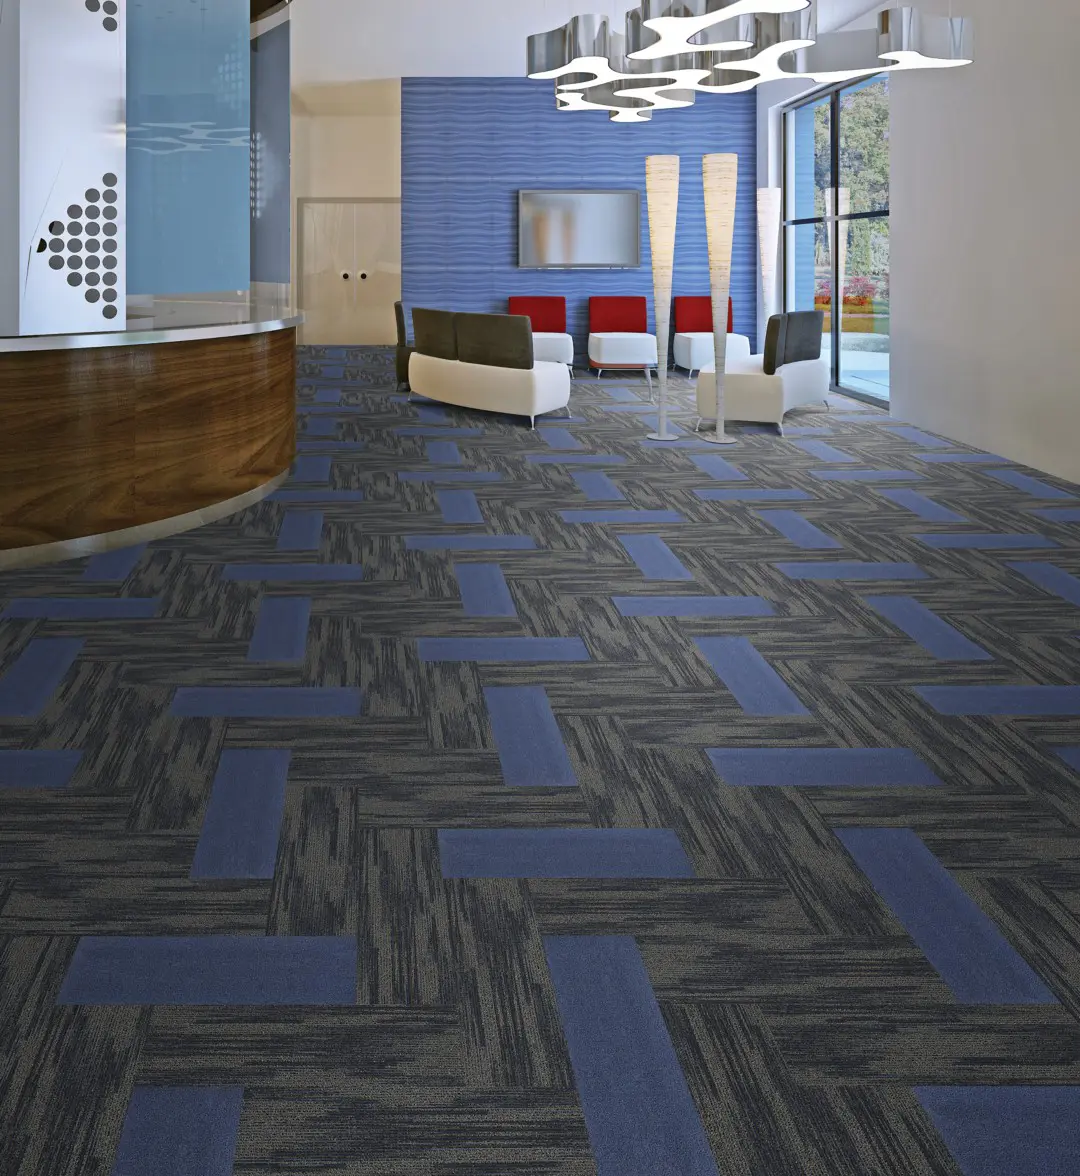 Business Space with Premium Carpet Installed